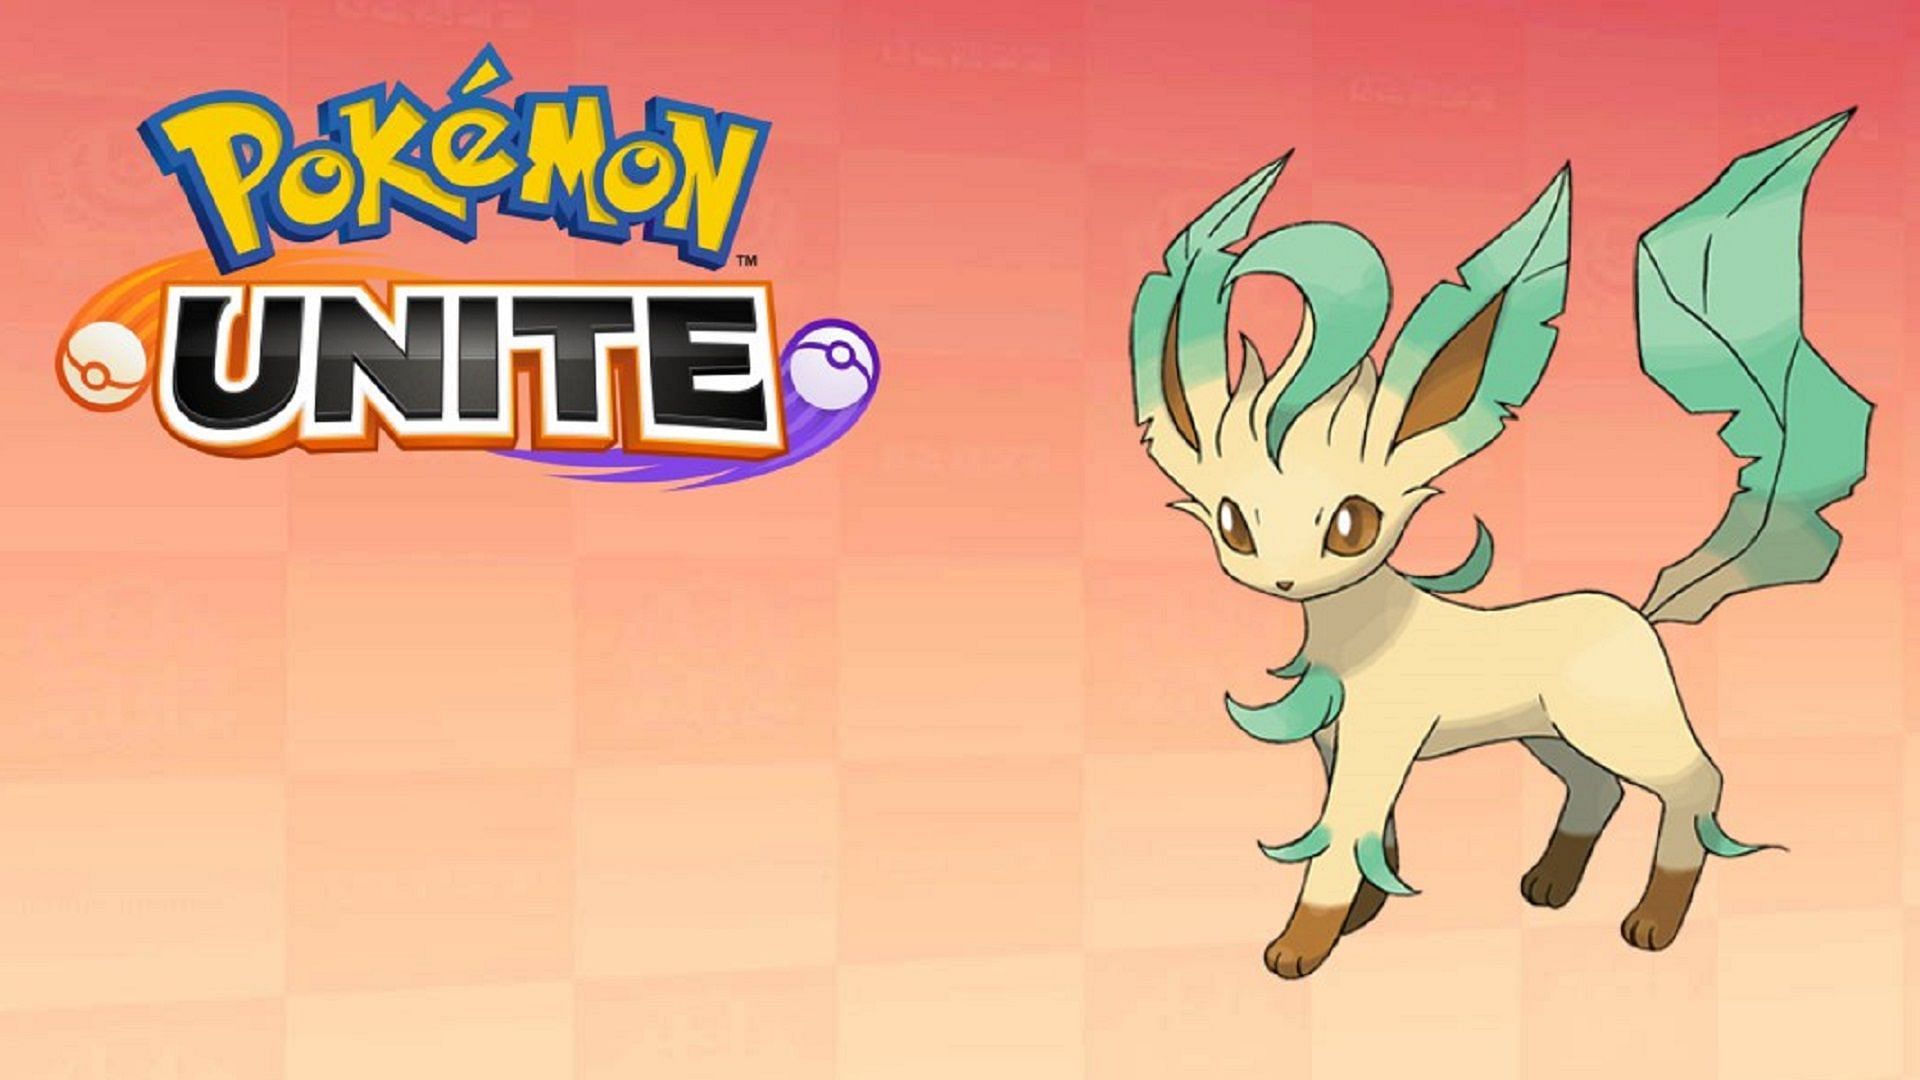 Leafeon may be the latest Eevee-lution to arrive in Pokemon Unite according to a recent leak.